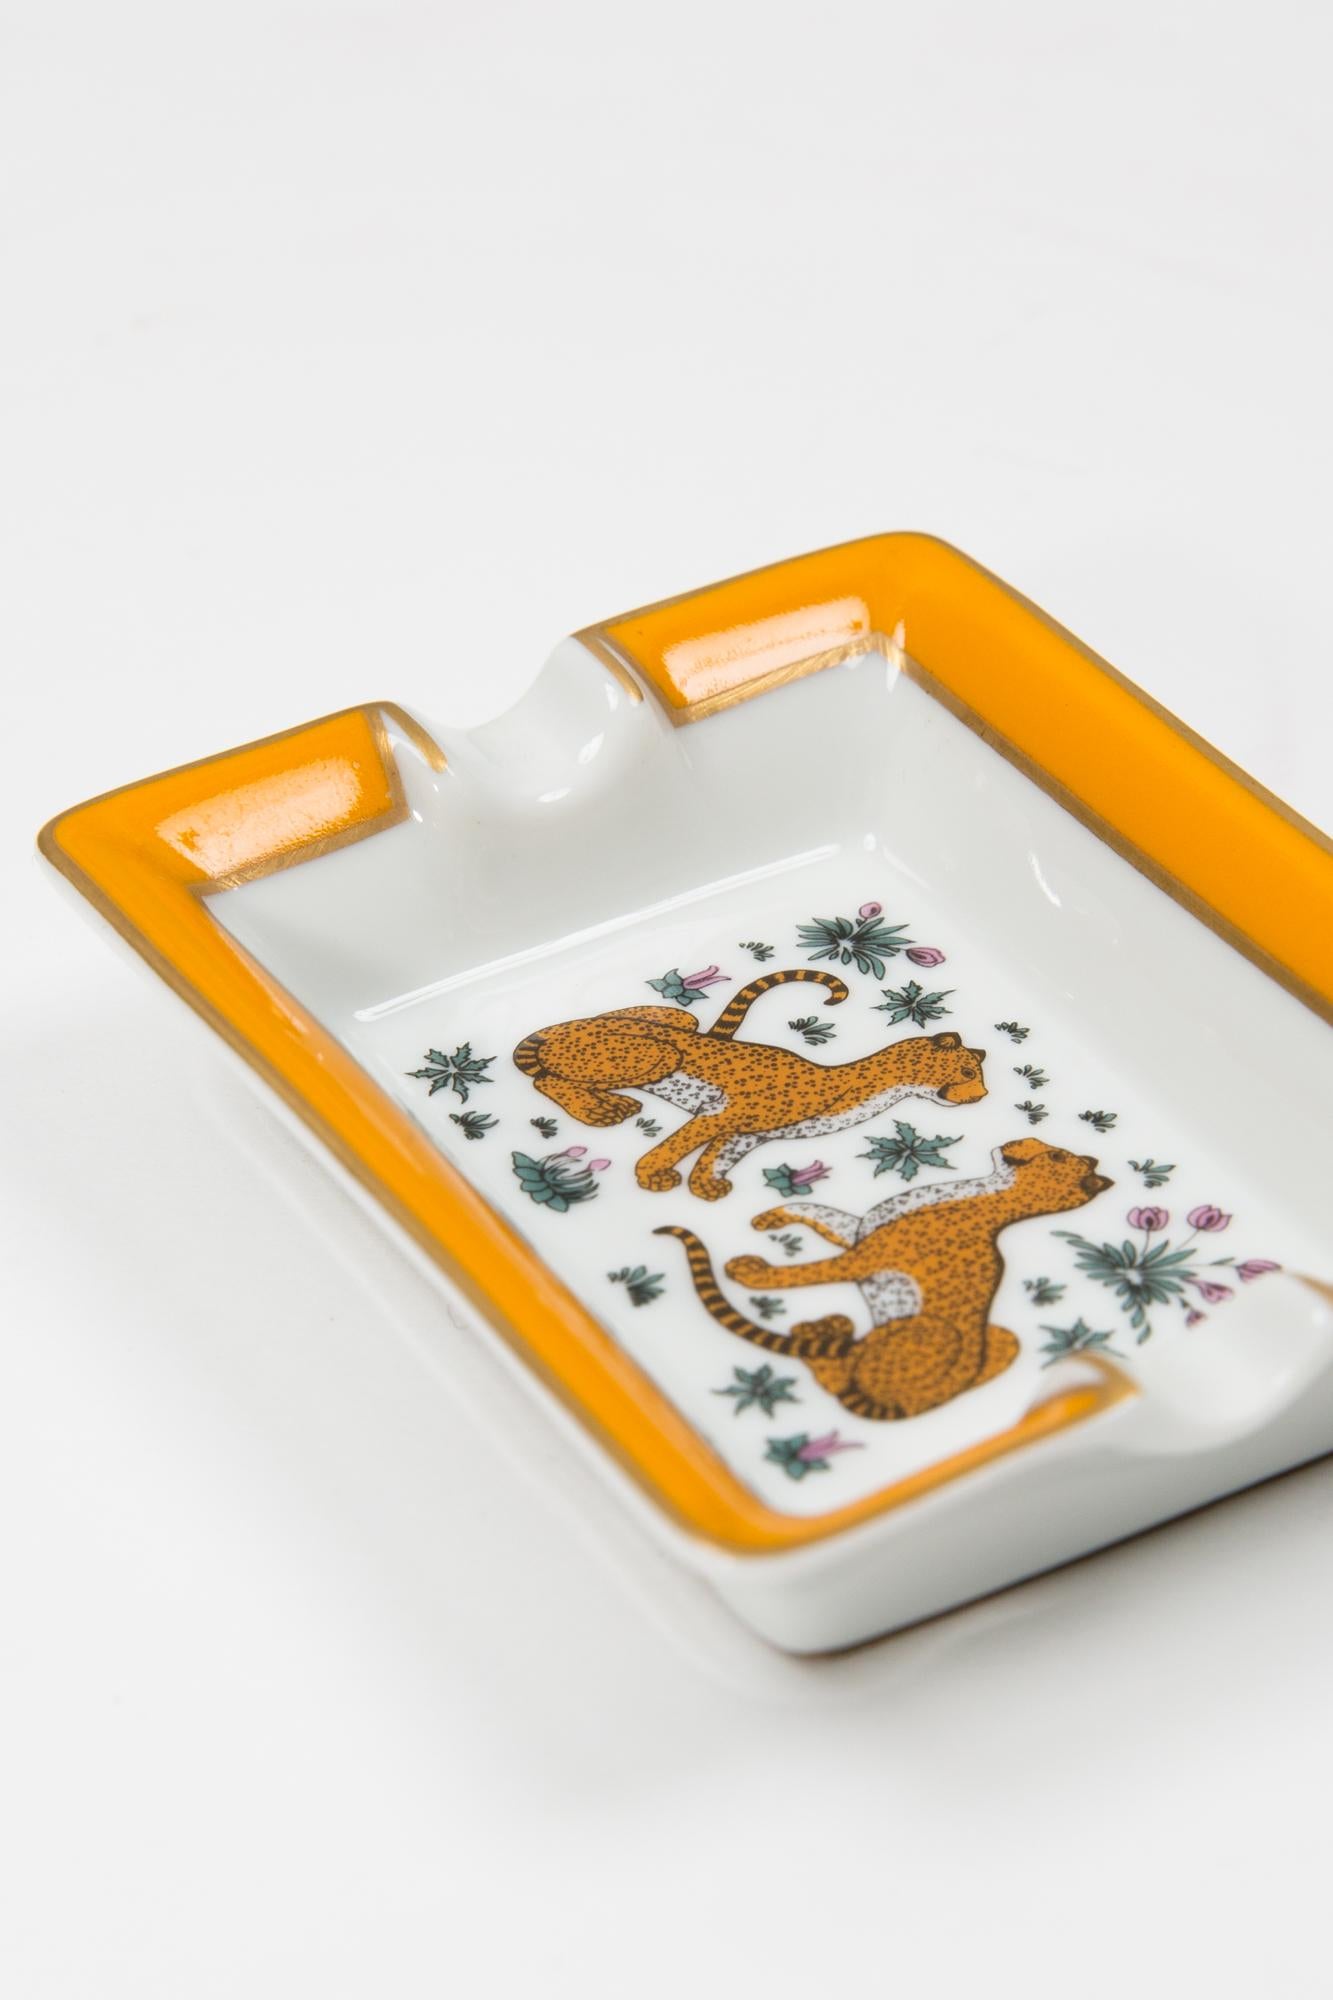 Hermès Leopard small size porcelain organizer or ashtray featuring an iconic Léopard center motive, a yellow border, a gold brush finishing, an under leather bottom, a Hermes gold-tone side signature.  
Circa 1980s 
In good vintage condition. 
Maxi